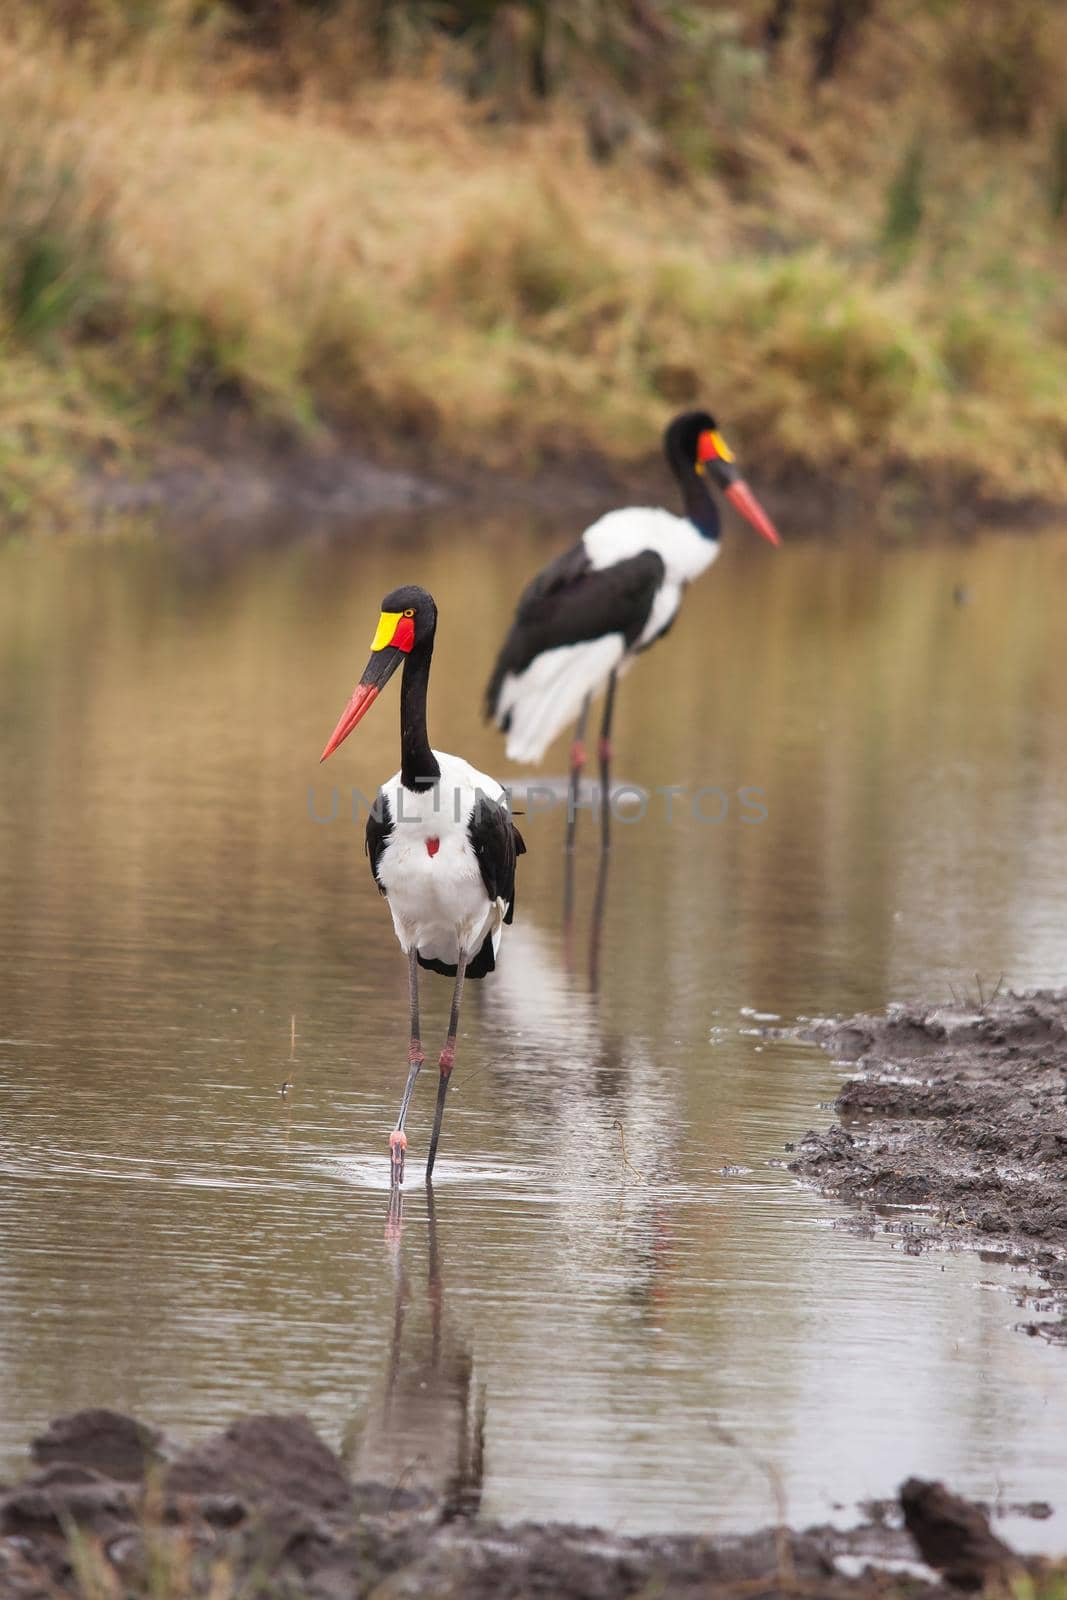 A breeding pair of Saddle-billed Stork (Ephippiorhynchus senegalensis) fishing in a small river in Kruger National Park. South Africa